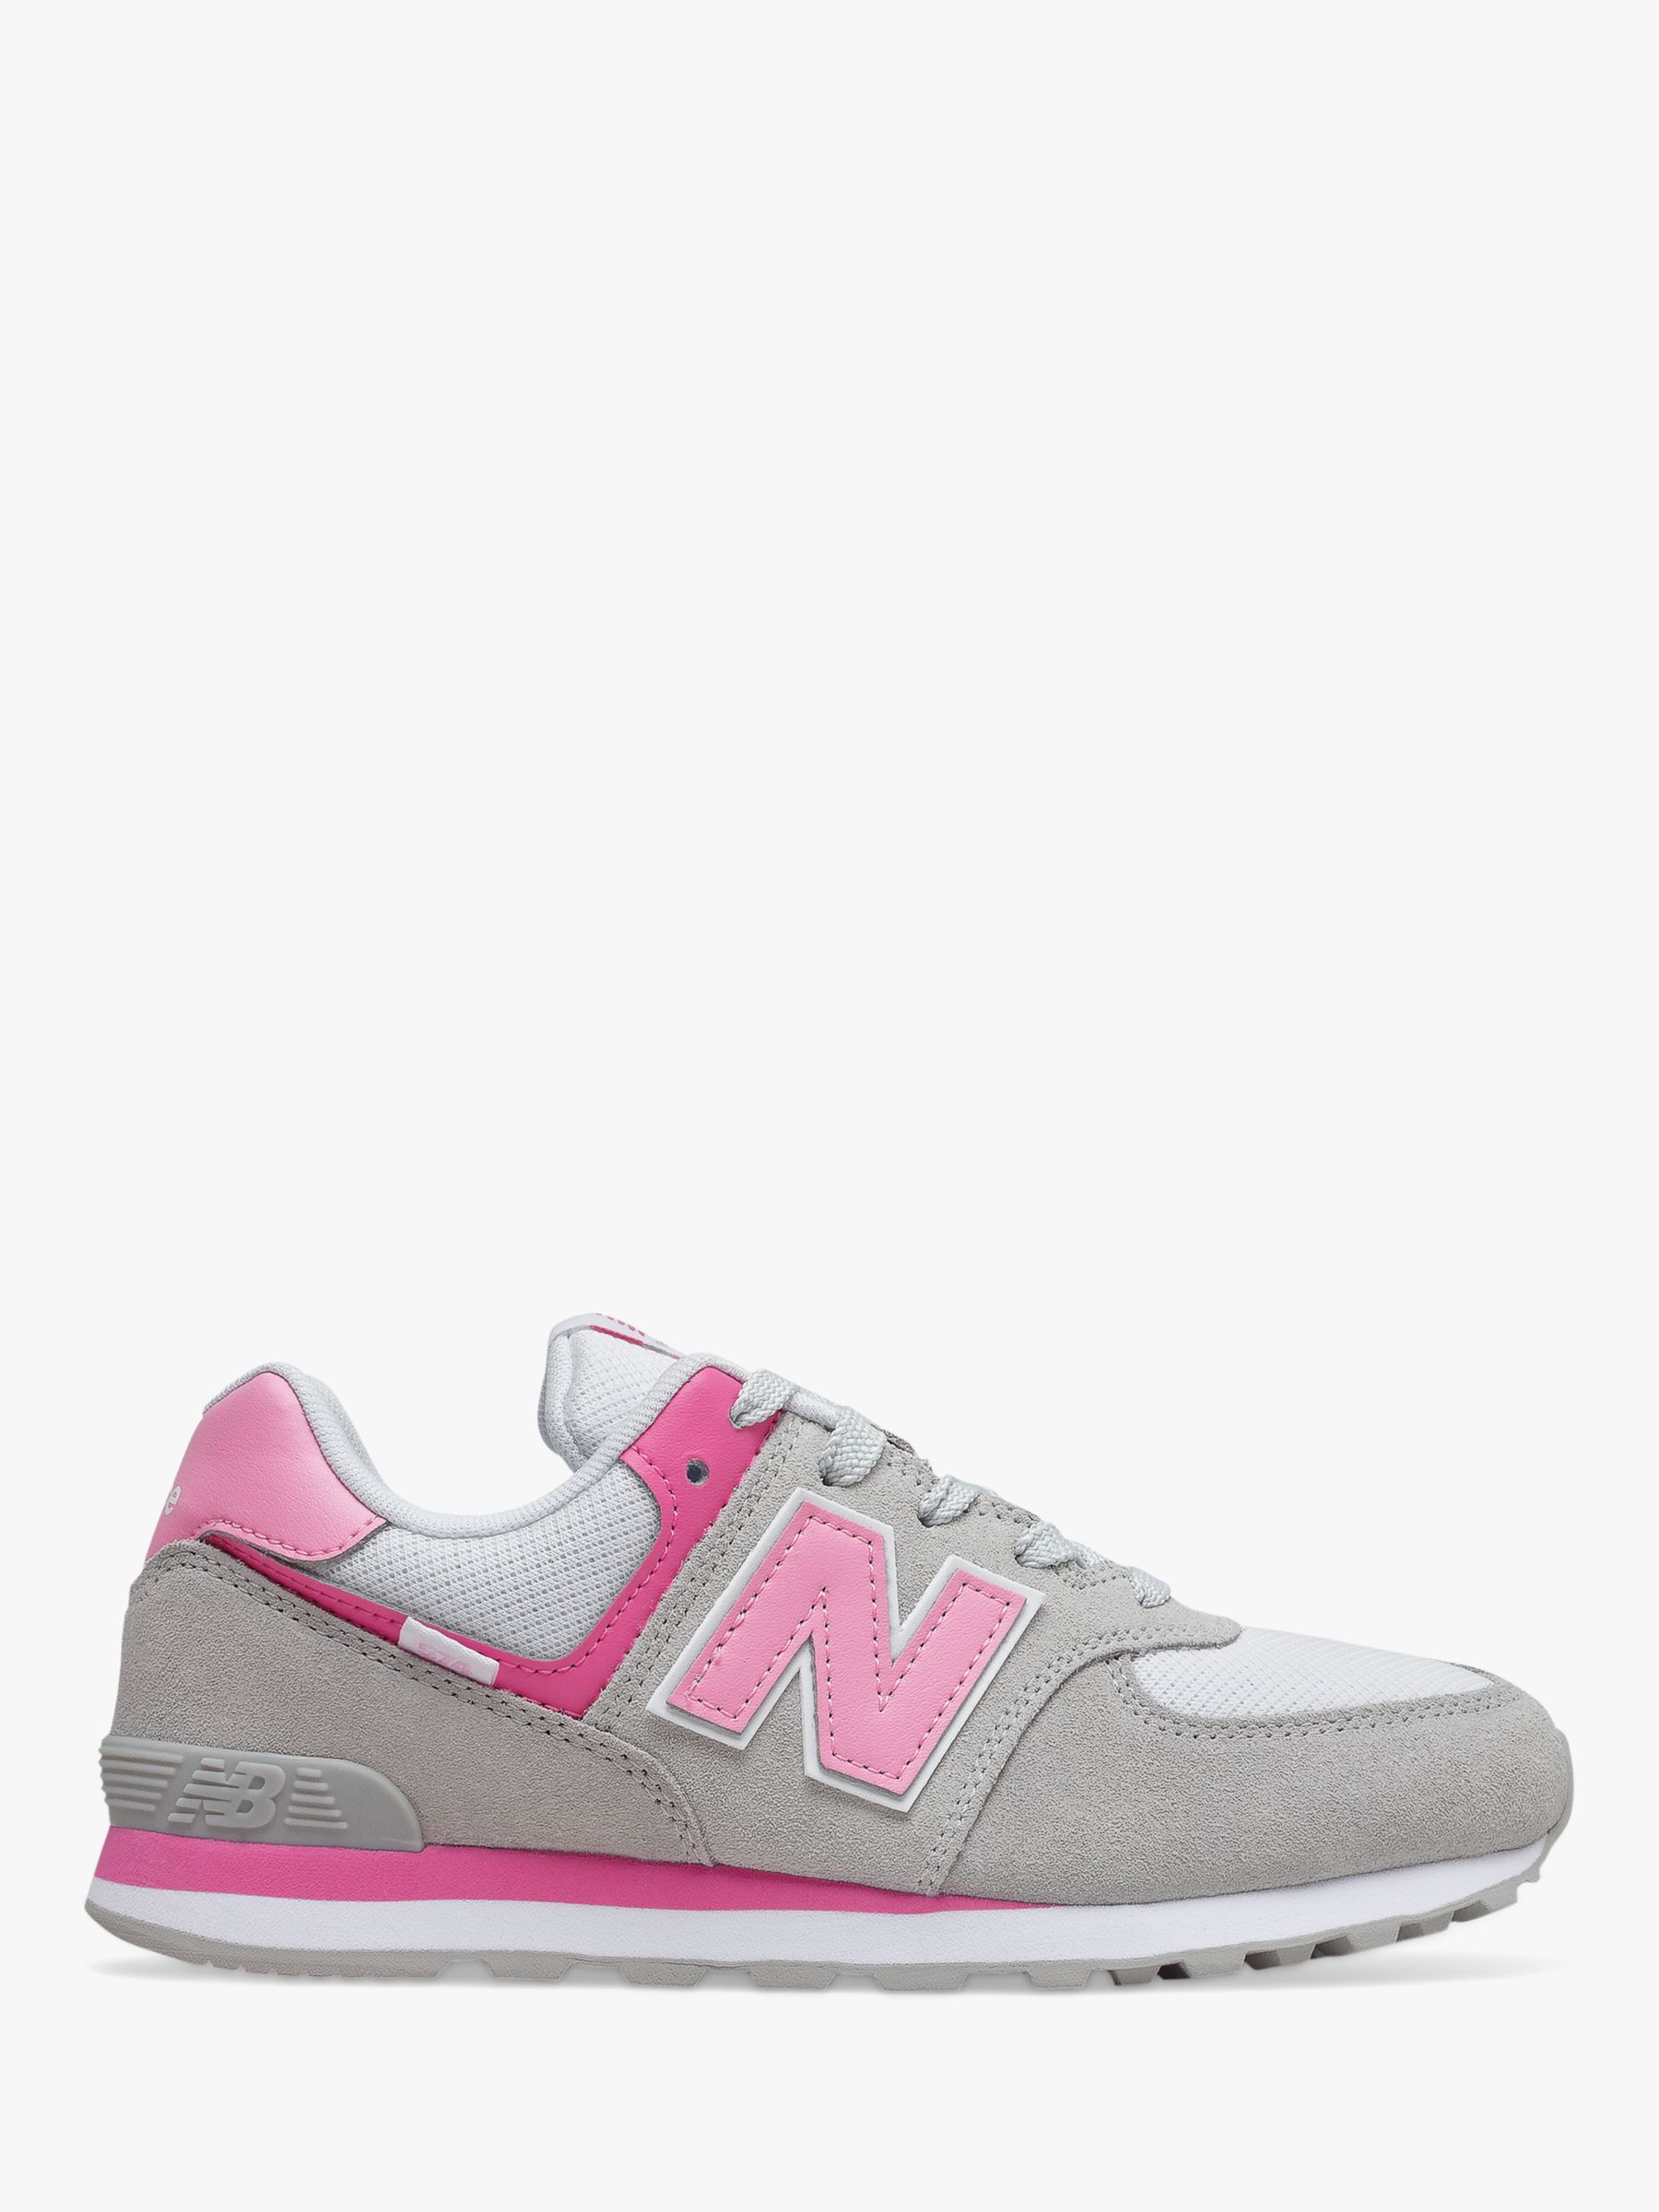 New Balance Children's 574 Varsity Sport Suede Lace Up Trainers